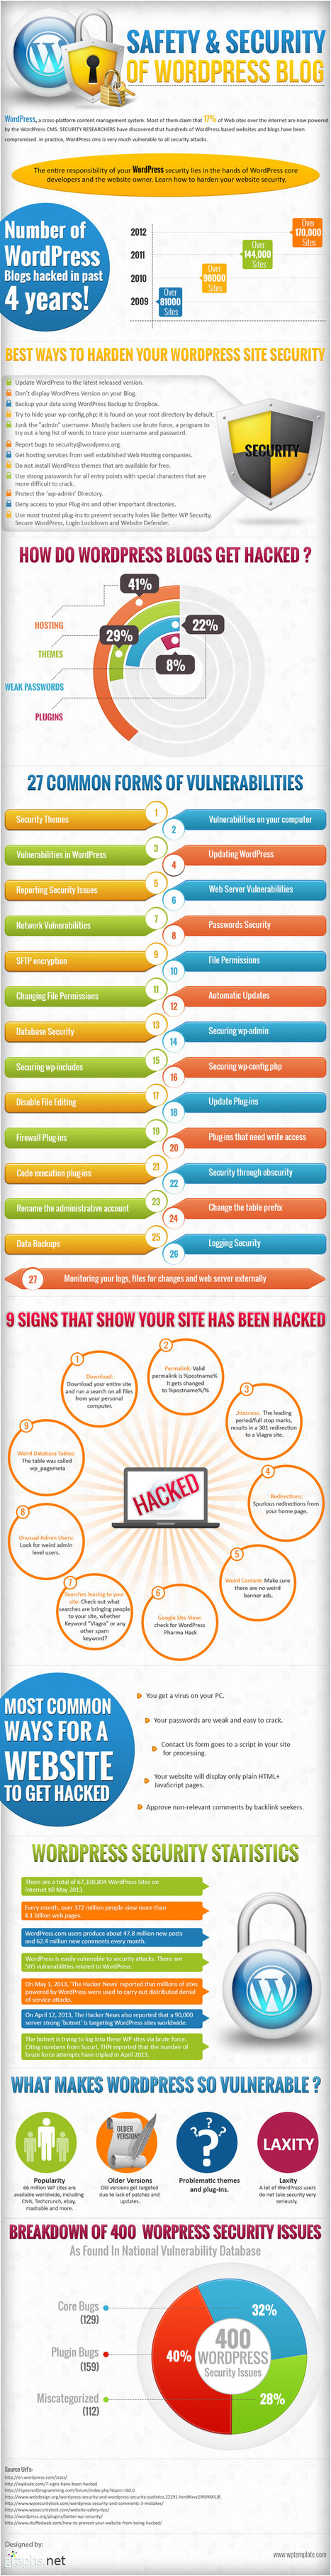 Safety and Security of WordPress Blog (Infographic) | ICT Security-Sécurité PC et Internet | Scoop.it